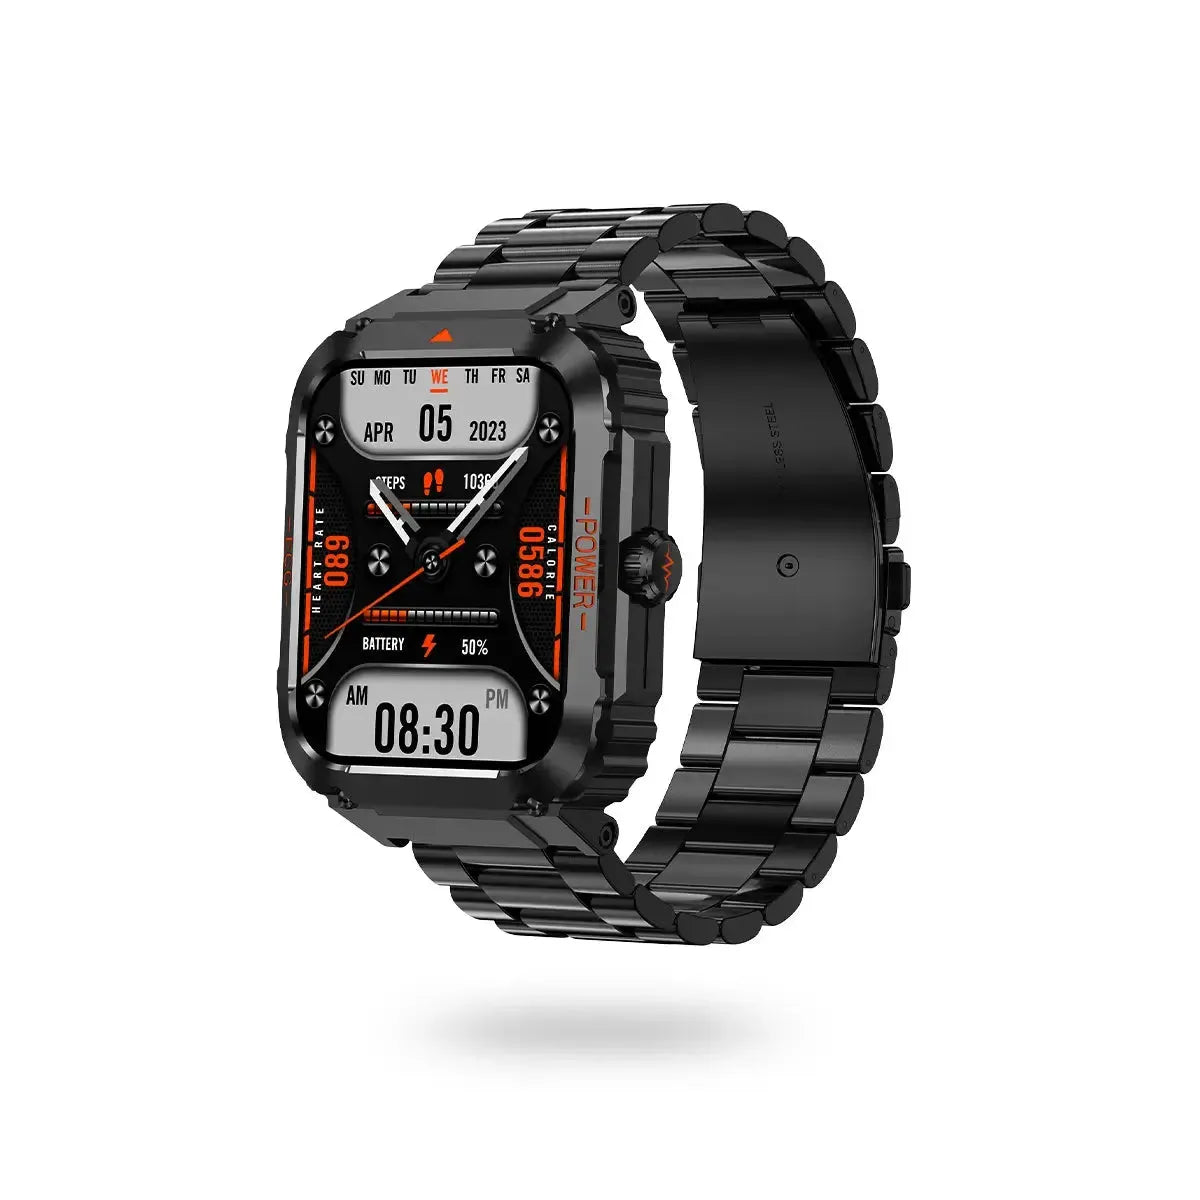 Tousains smartwatch S1 with steel strap